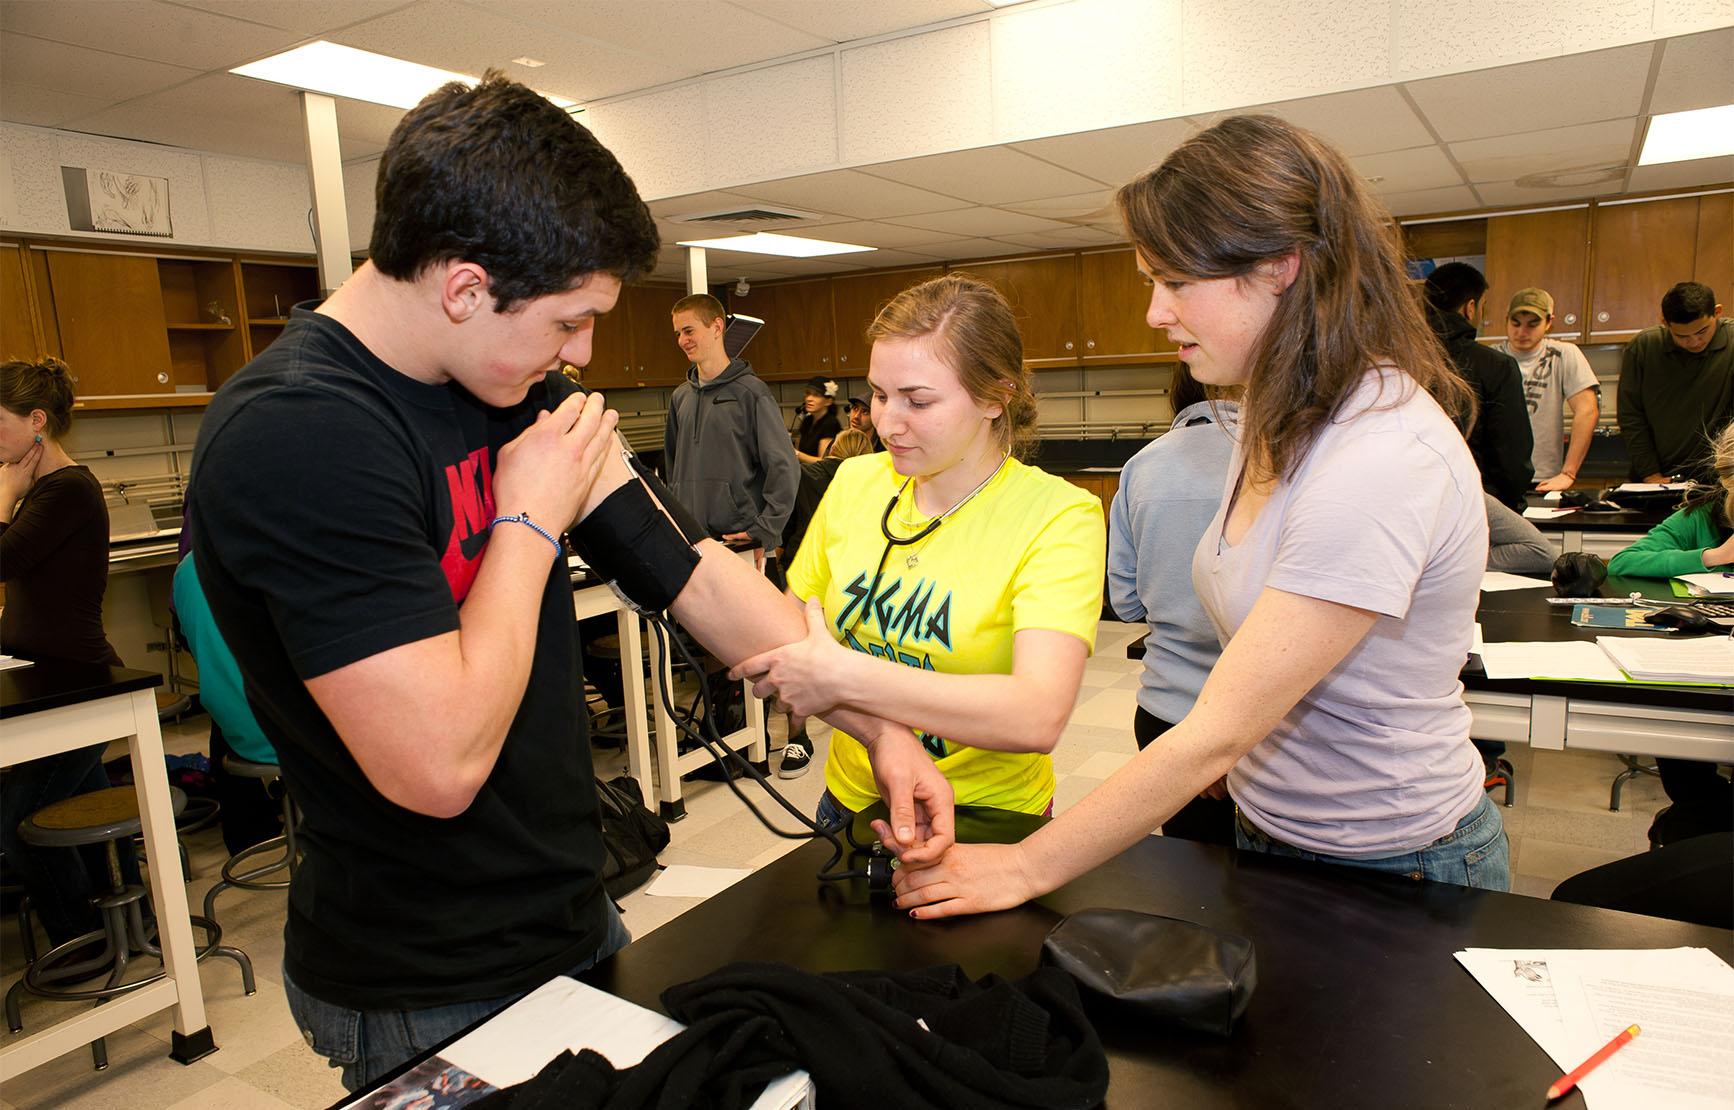 Students taking blood pressure measurement in anatomy class.